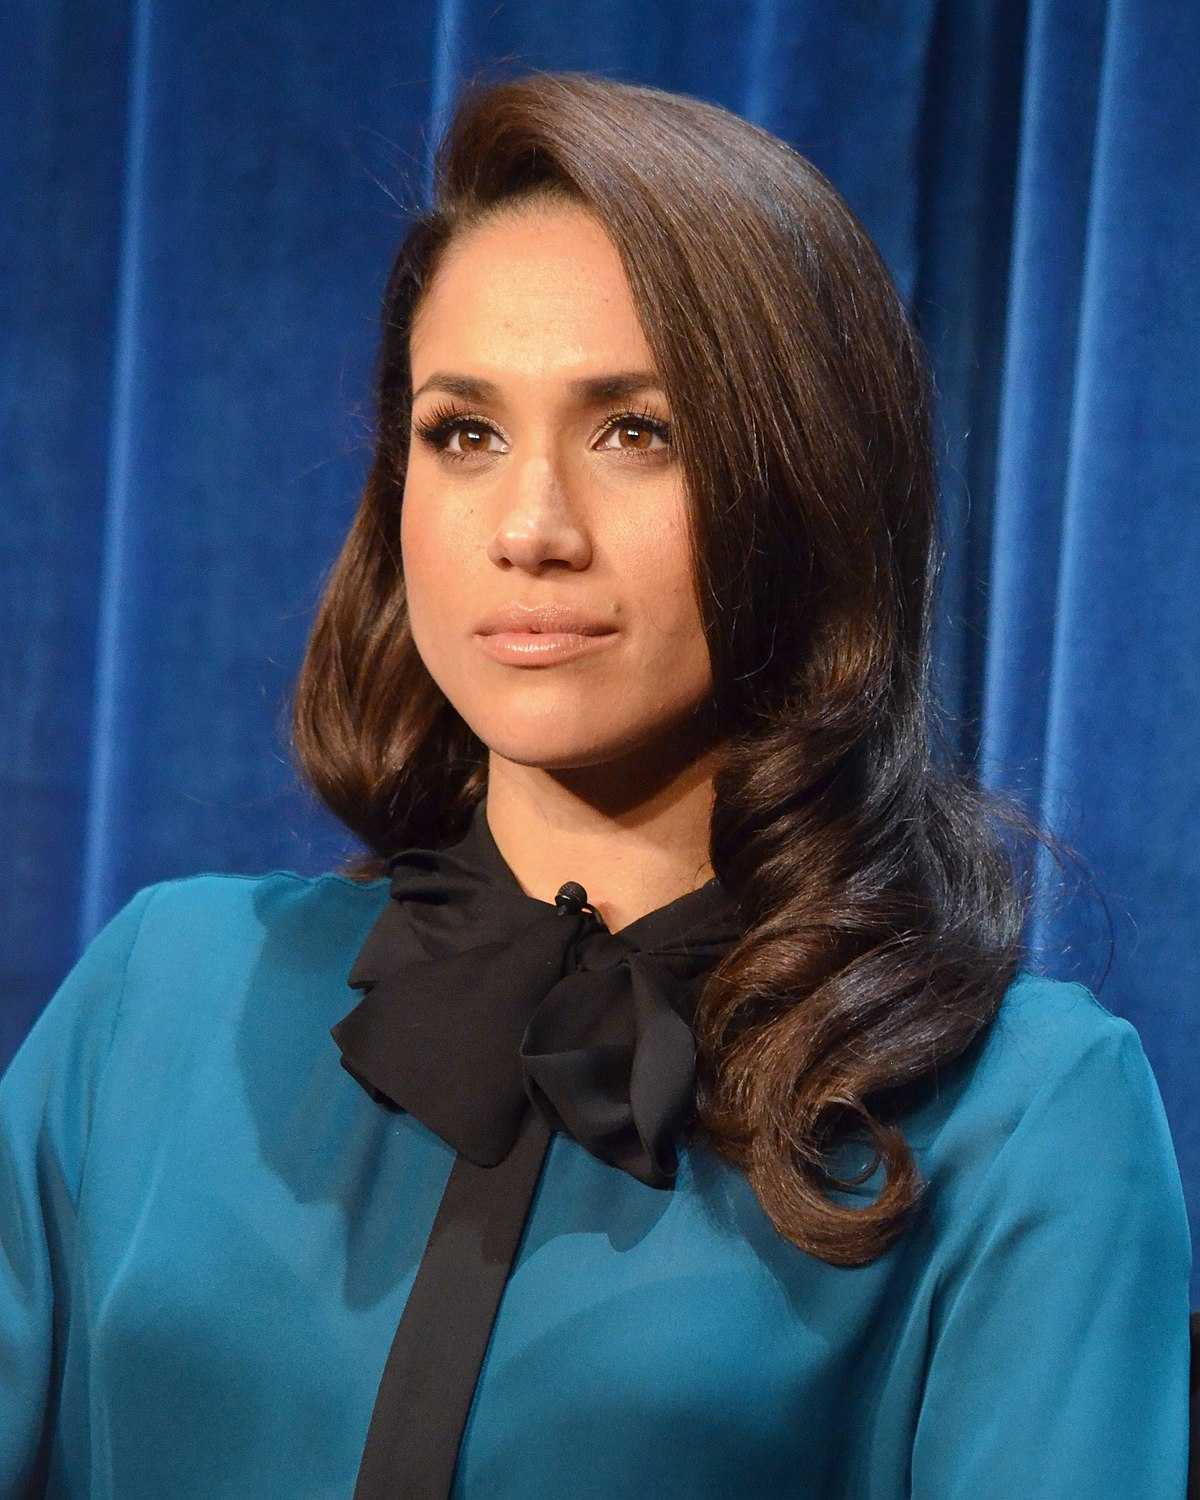 70+ Hot Pictures Of Meghan Markle Which Are Just Too Hot To Handle 238